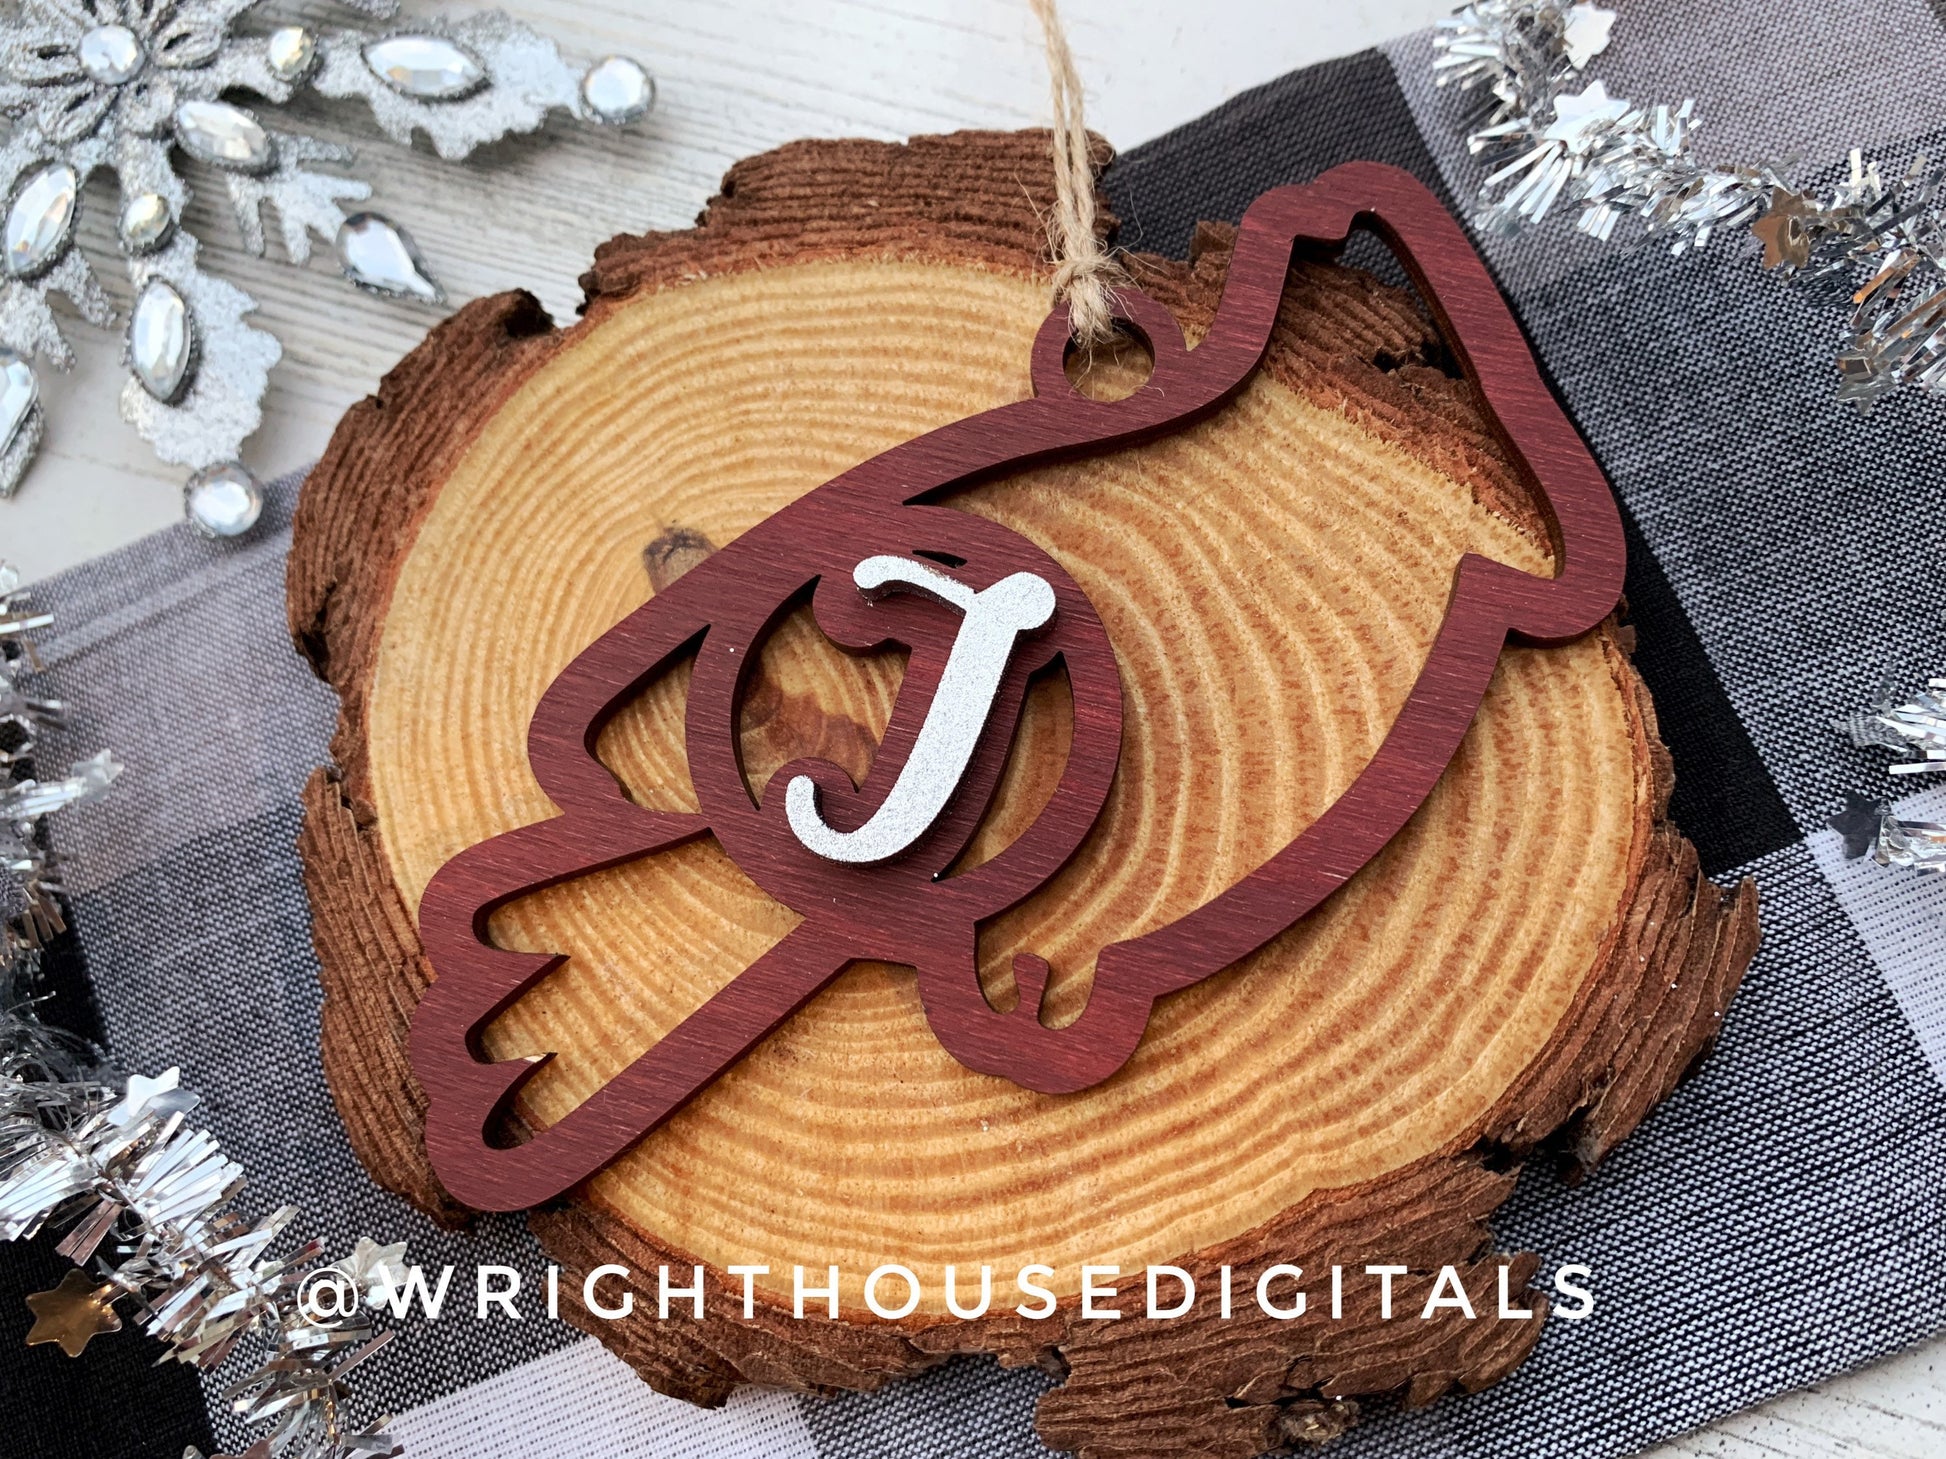 Cardinal Monogram Memorial Christmas Ornament Bundle - Personalized Stocking Tags - Quick Cut File For Glowforge Lasers - Digital SVG File